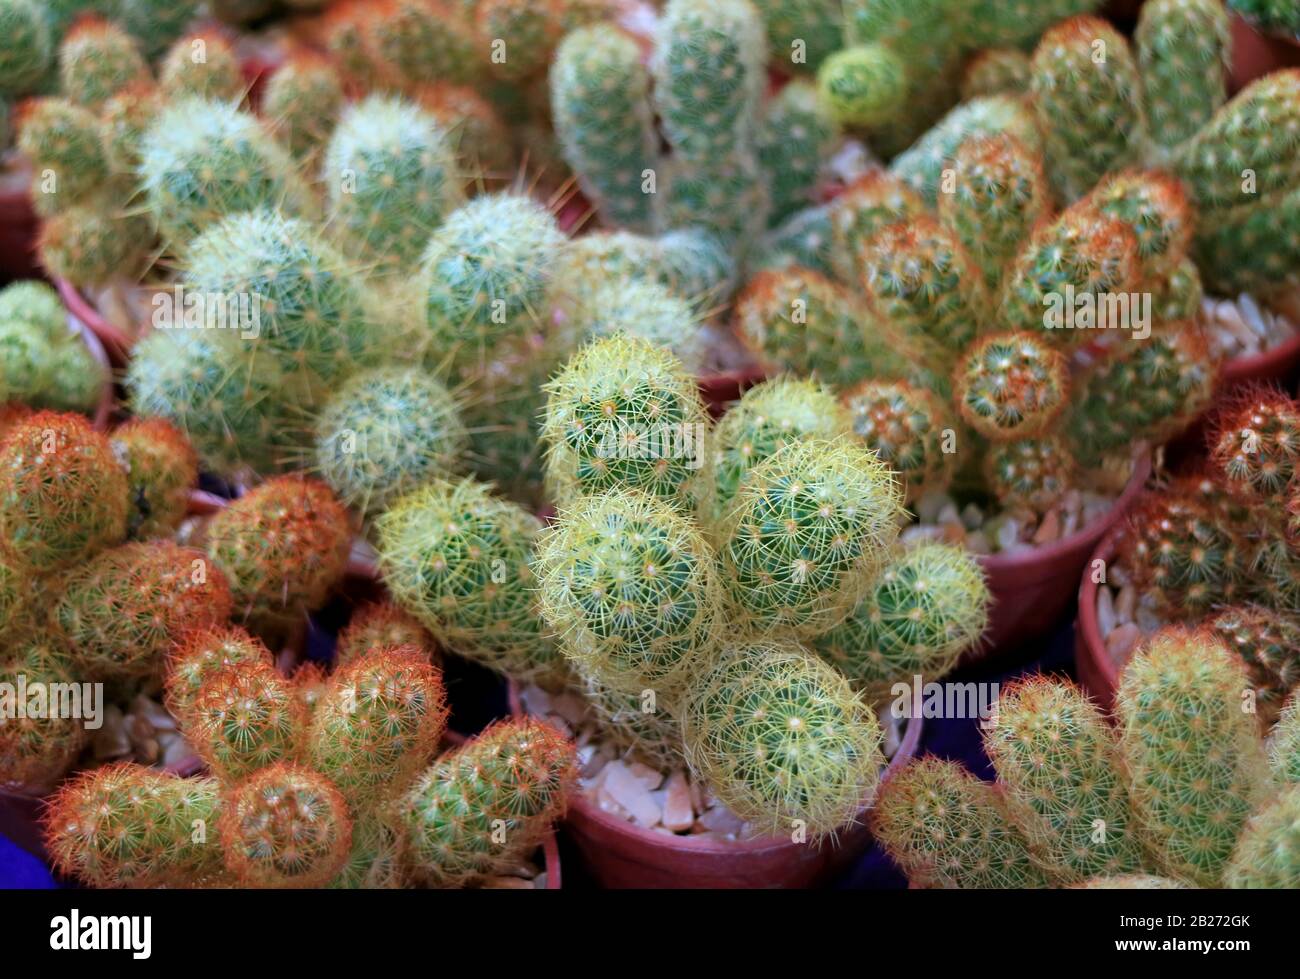 Row of potted Ladyfinger Cactus Succulent Plants For Sale Stock Photo